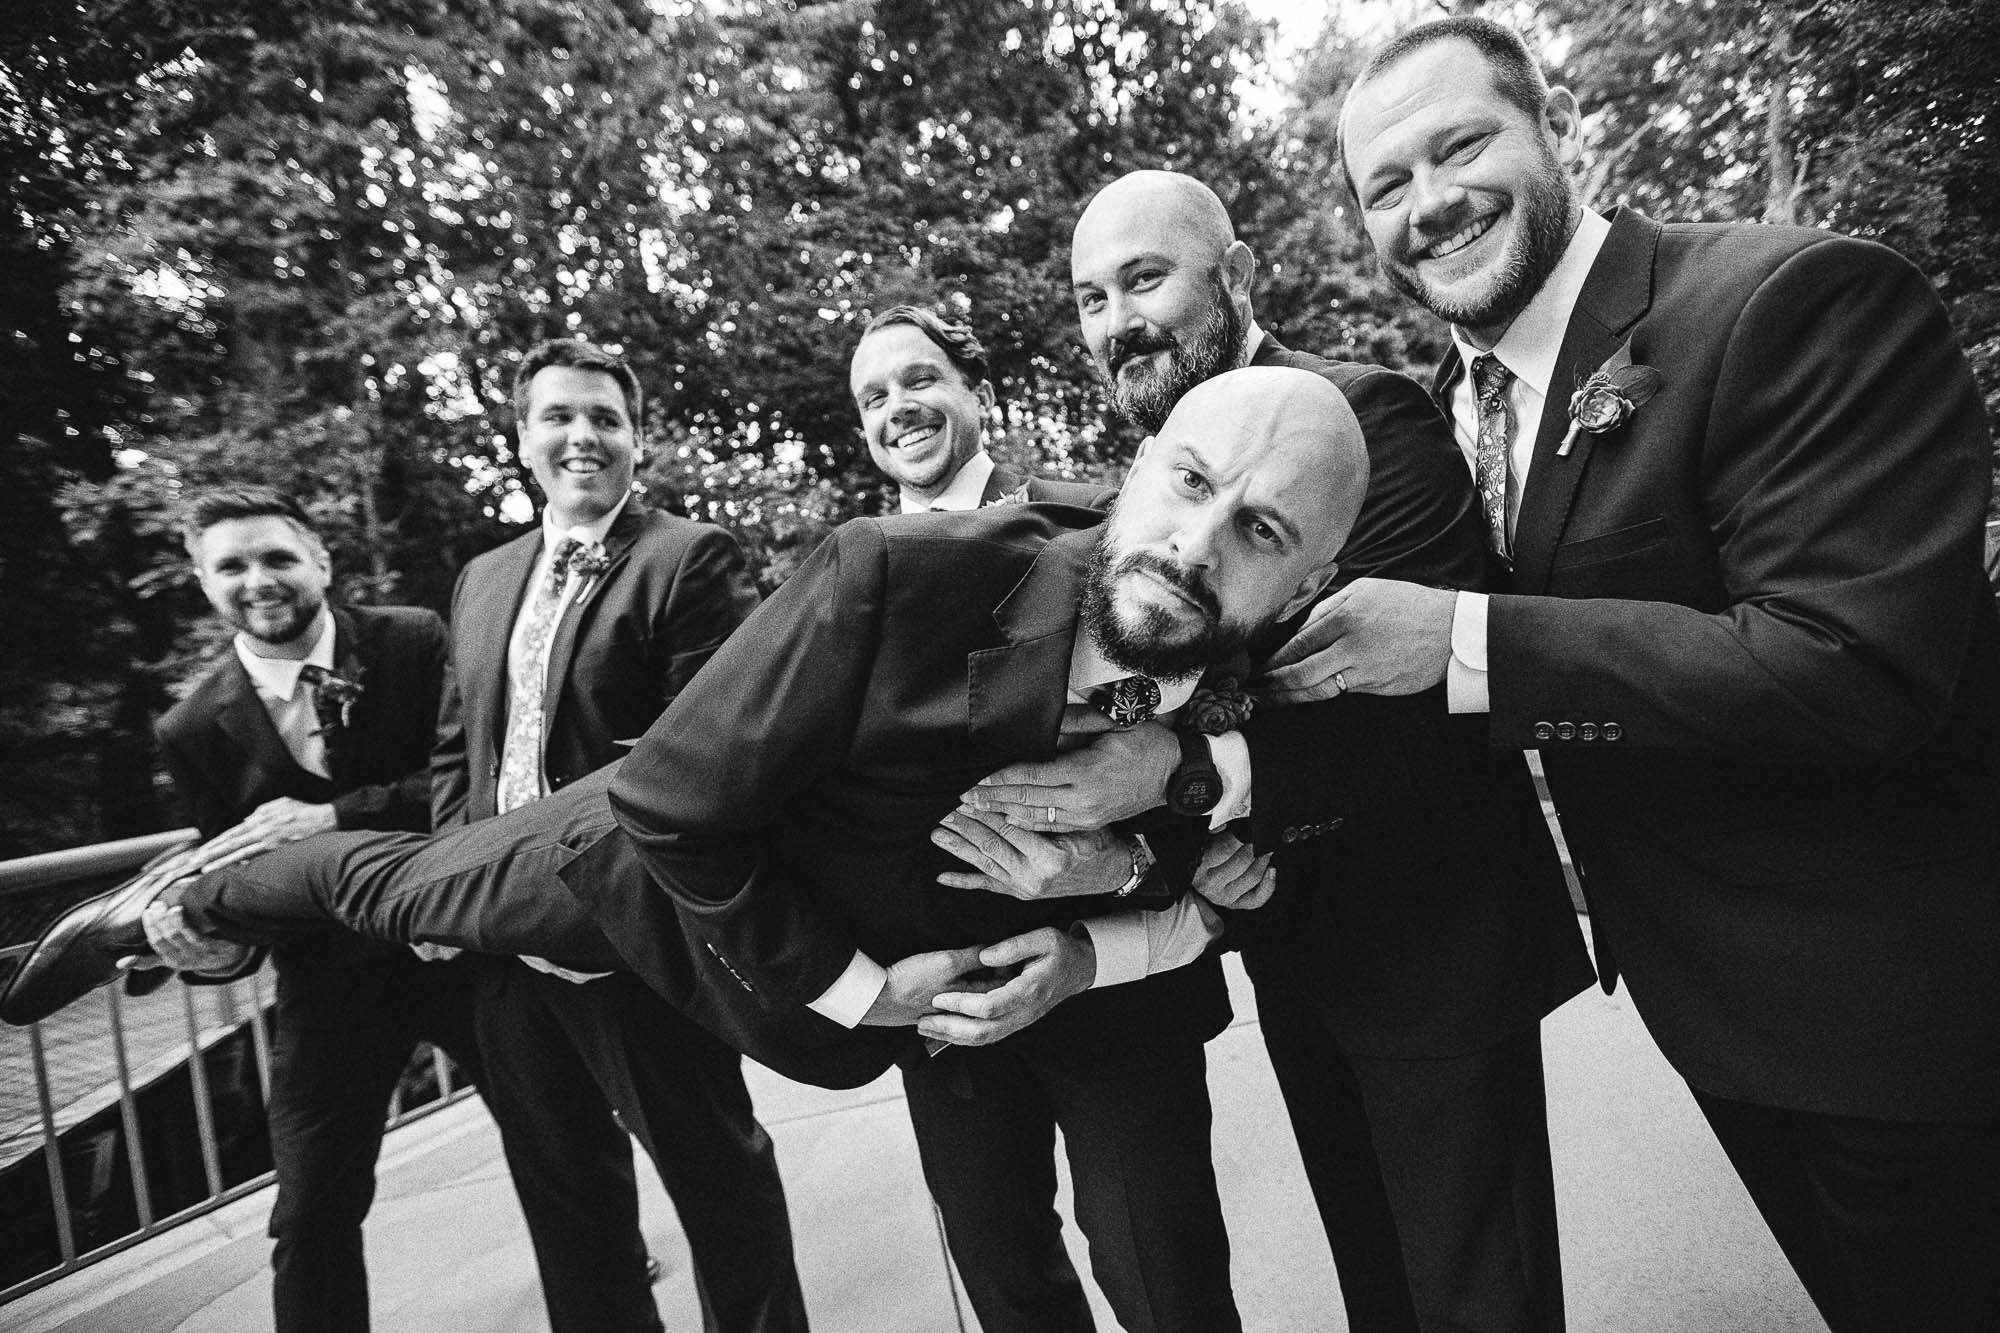 A black-and-white photo of a groom making a silly face while the groomsmen hold him in the air